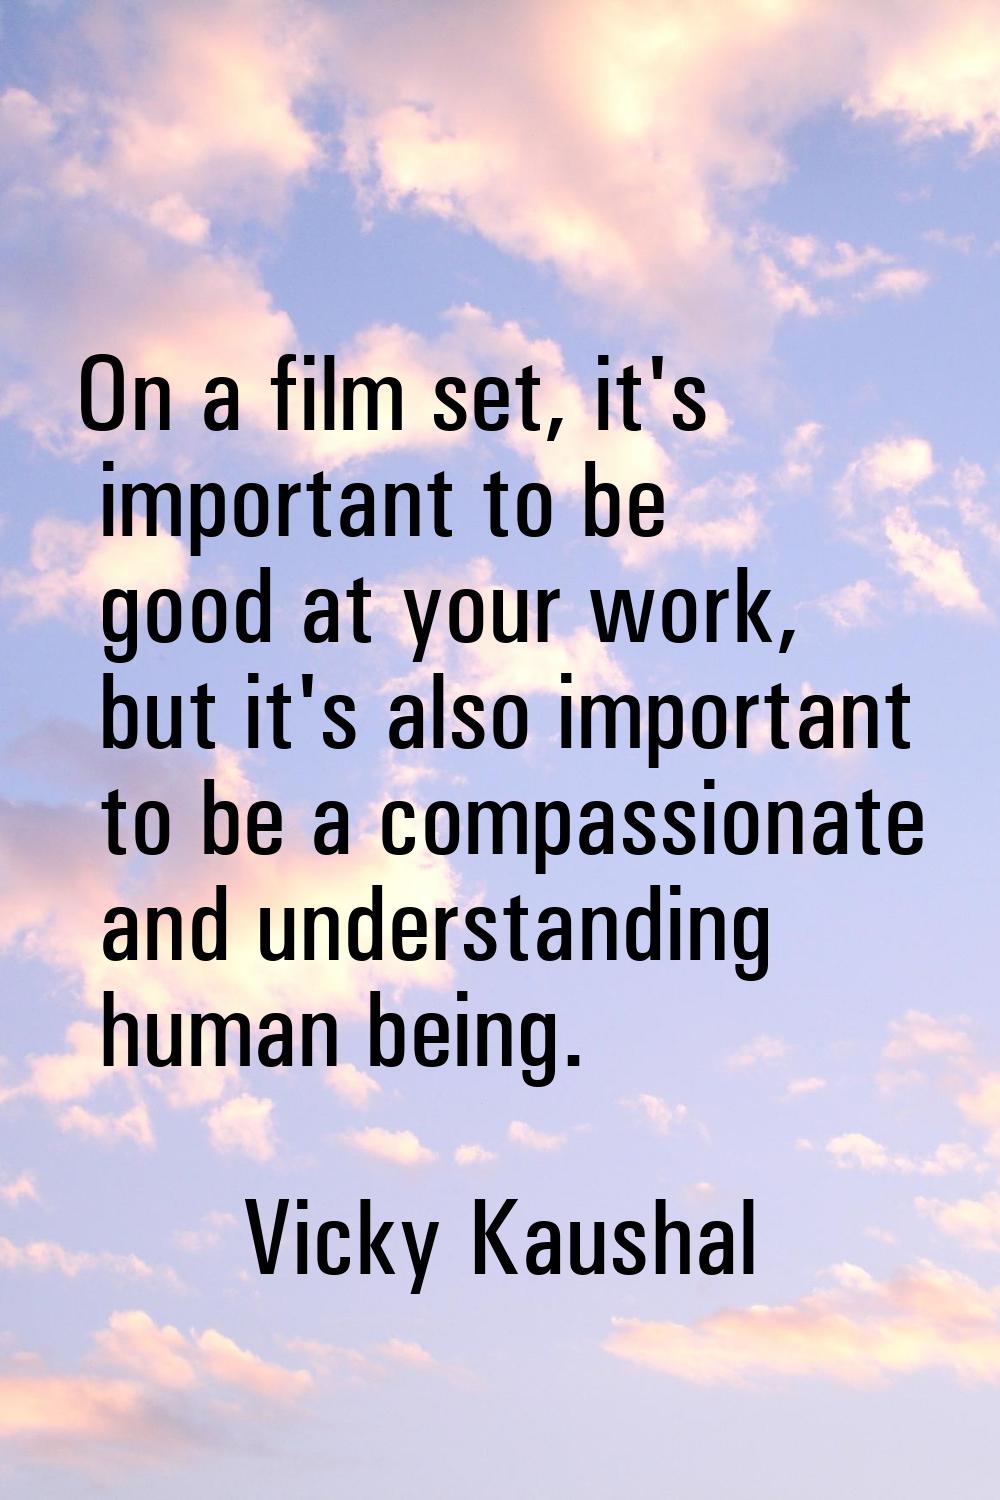 On a film set, it's important to be good at your work, but it's also important to be a compassionat